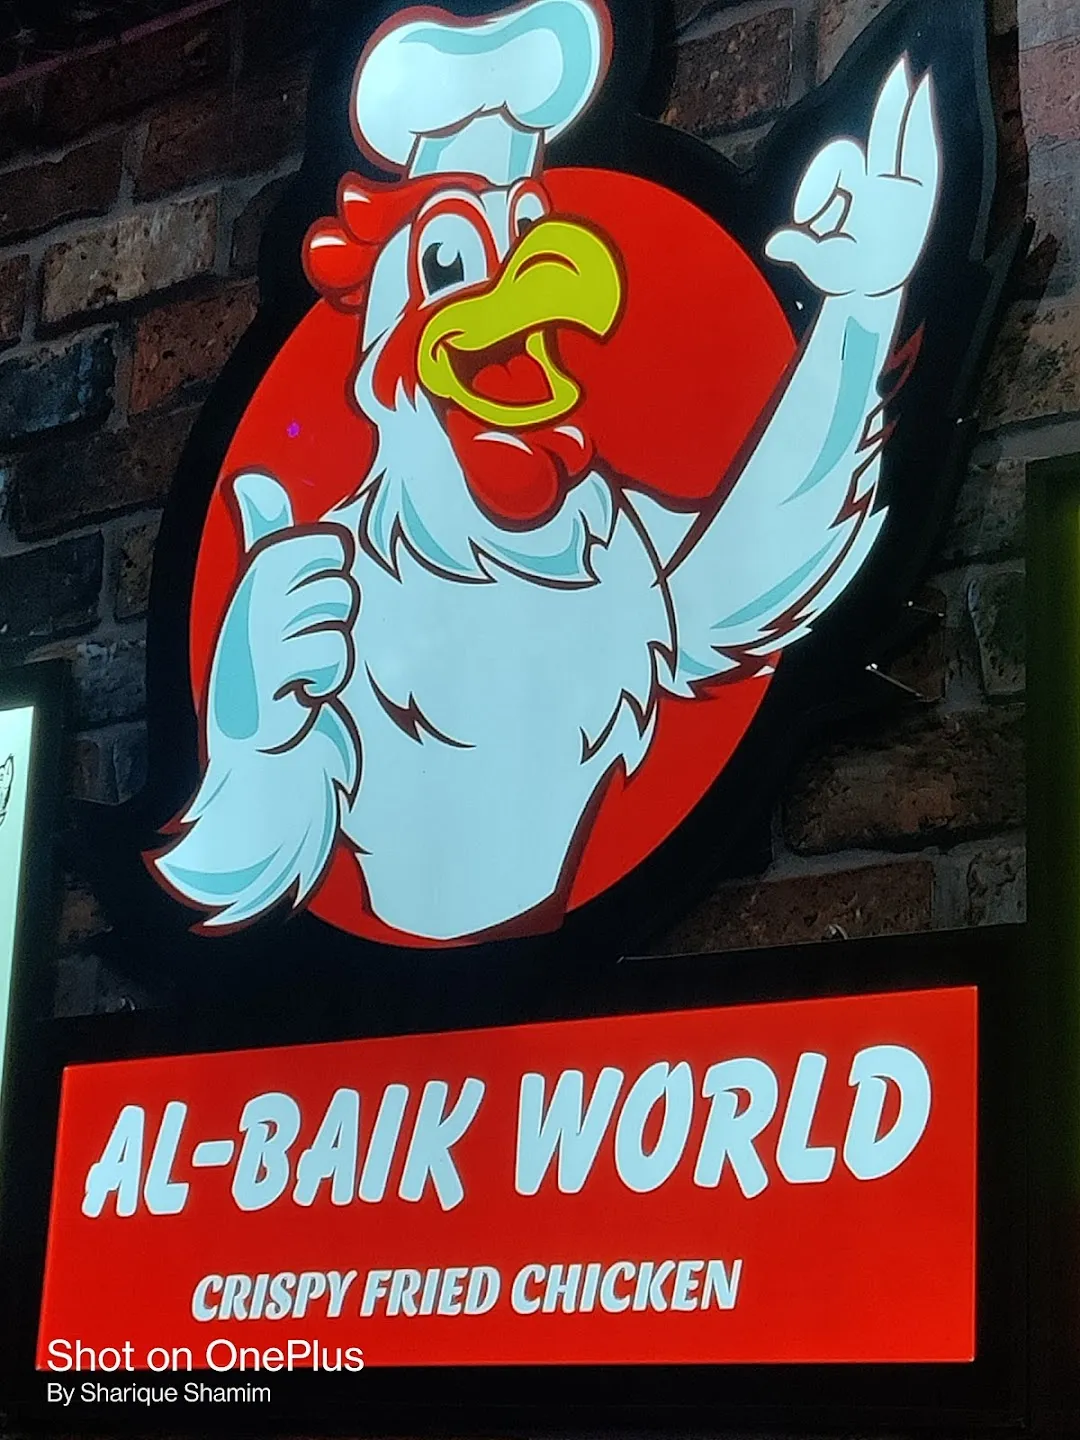 How to get AL BAIK profitable food franchise in India